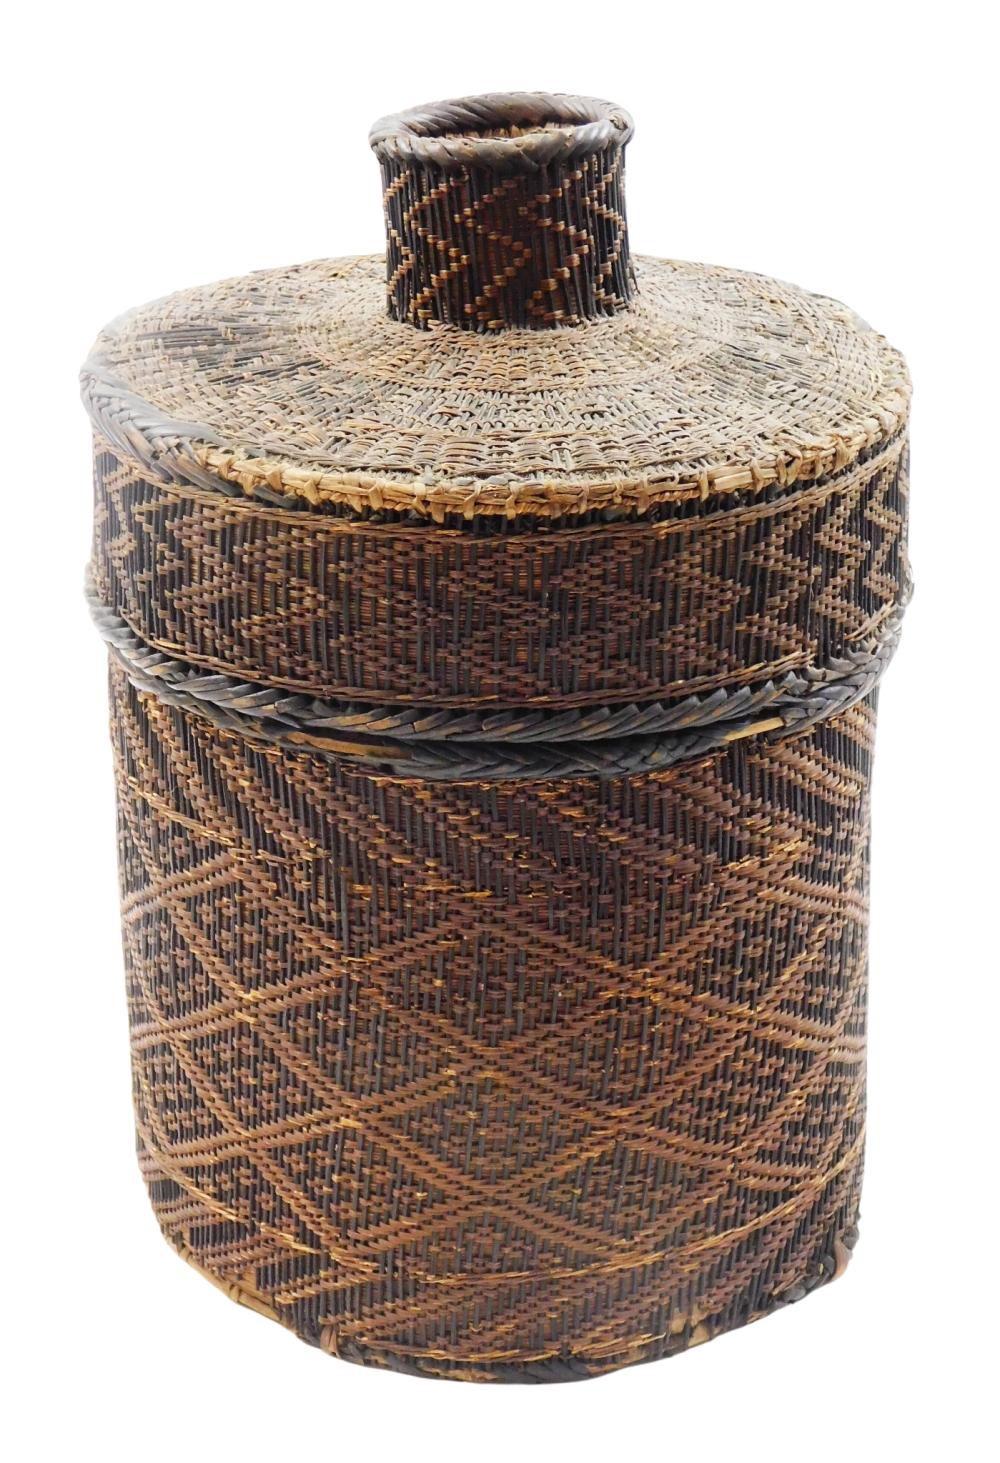 UNUSUAL CYLINDRICAL BASKET IN BROWN